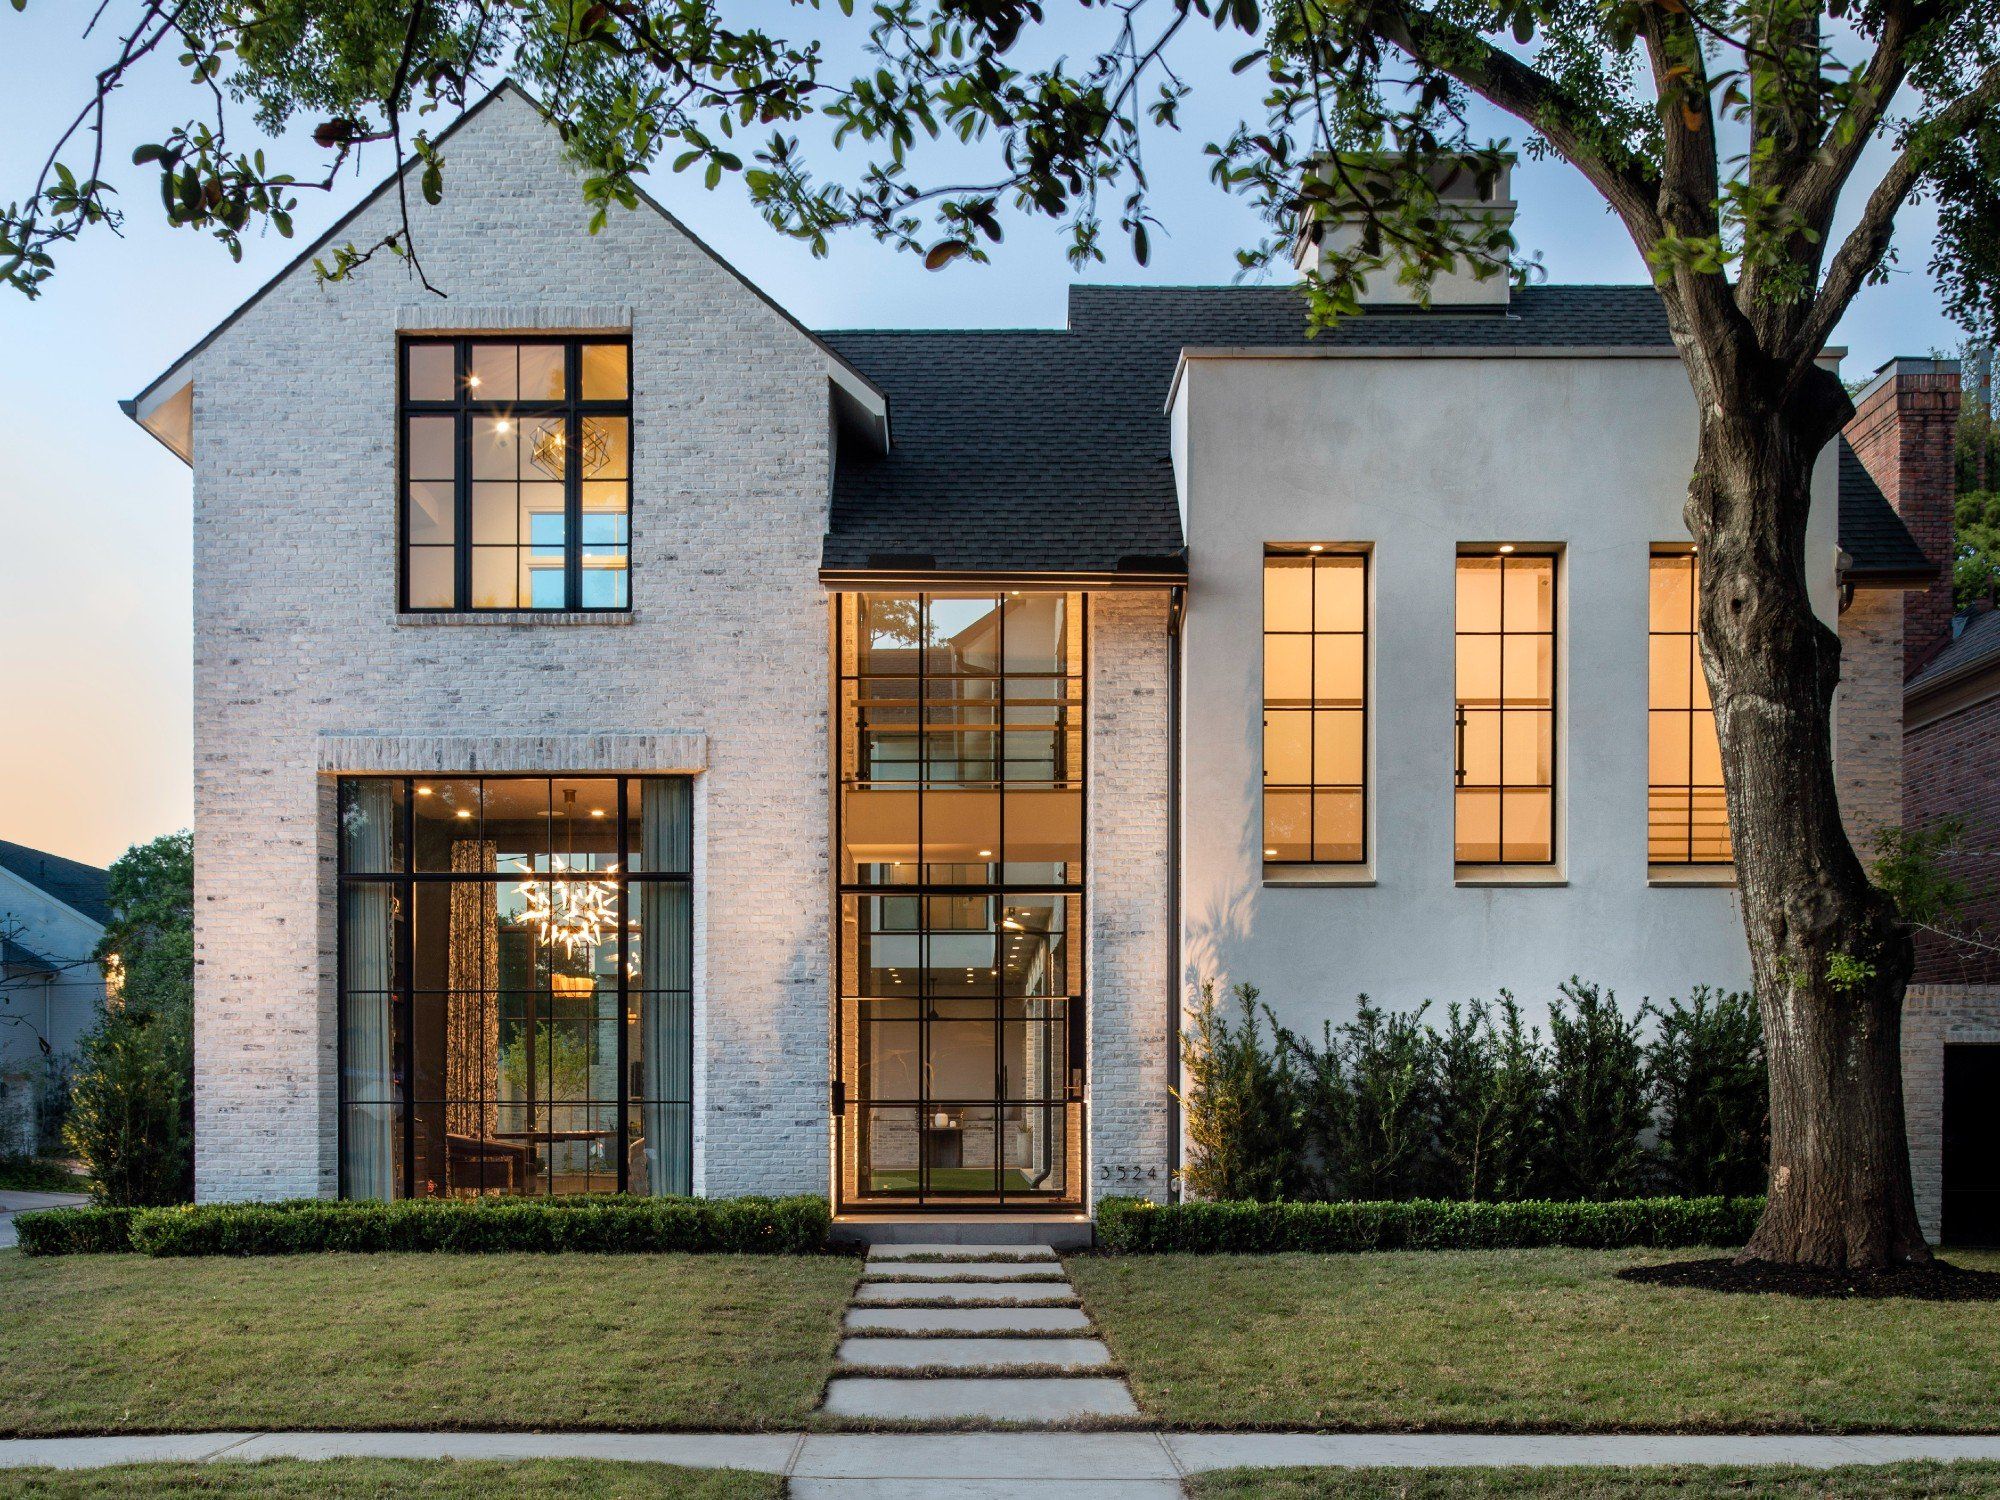 “Austin remains resilient and able to withstand broader economic turbulence more effectively," said ABoR housing economist Clare Losey. Photo courtesy of West U Home Tour